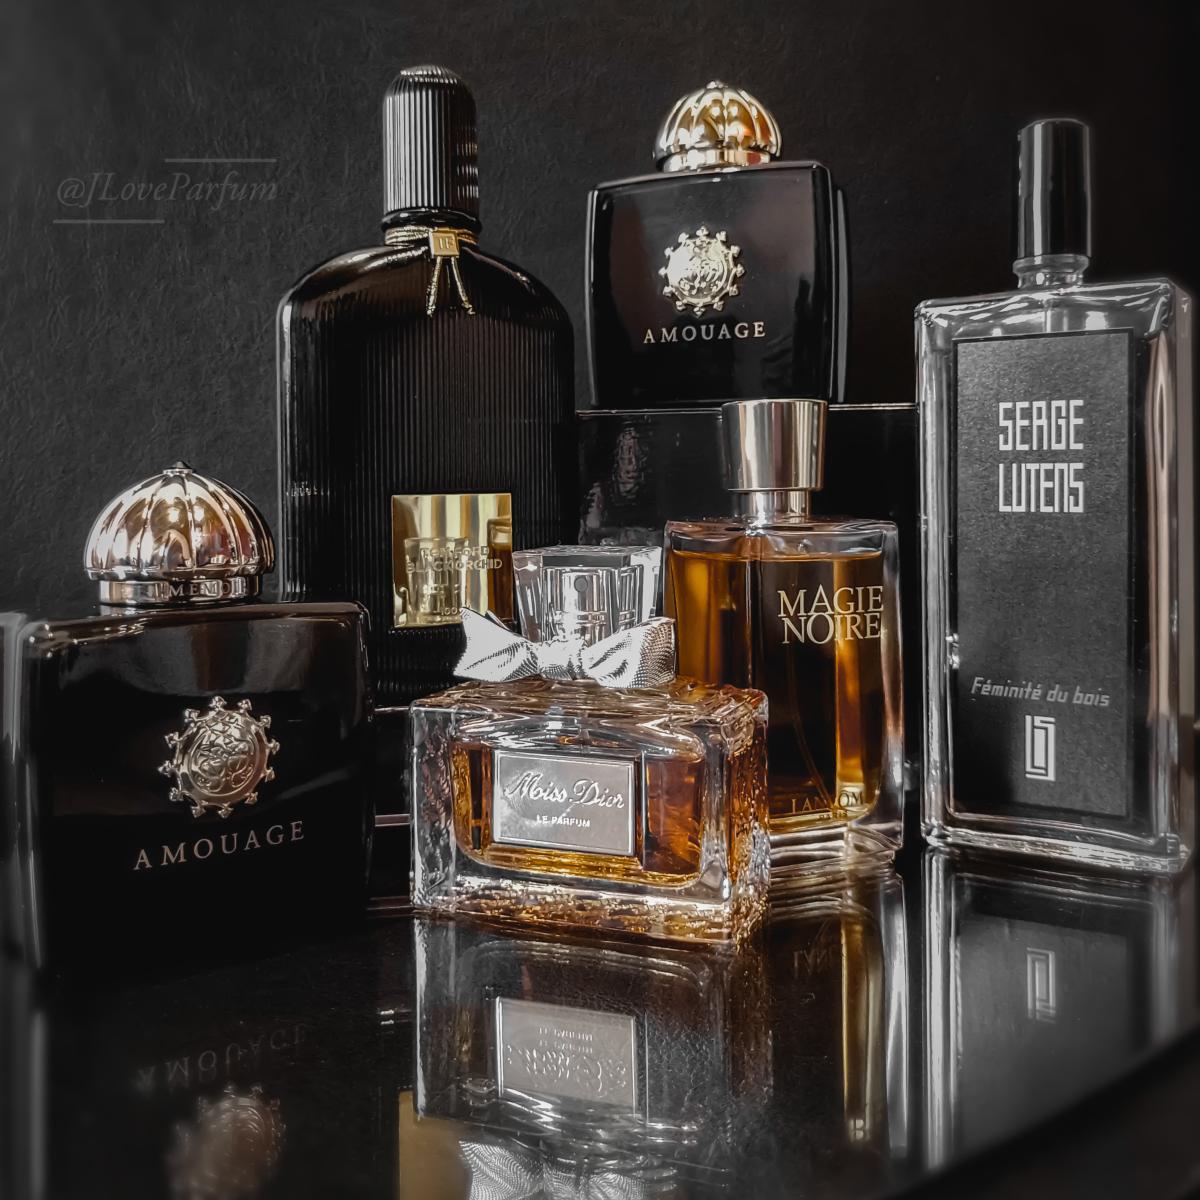 The best men's fragrances and aftershaves to get you smelling nice